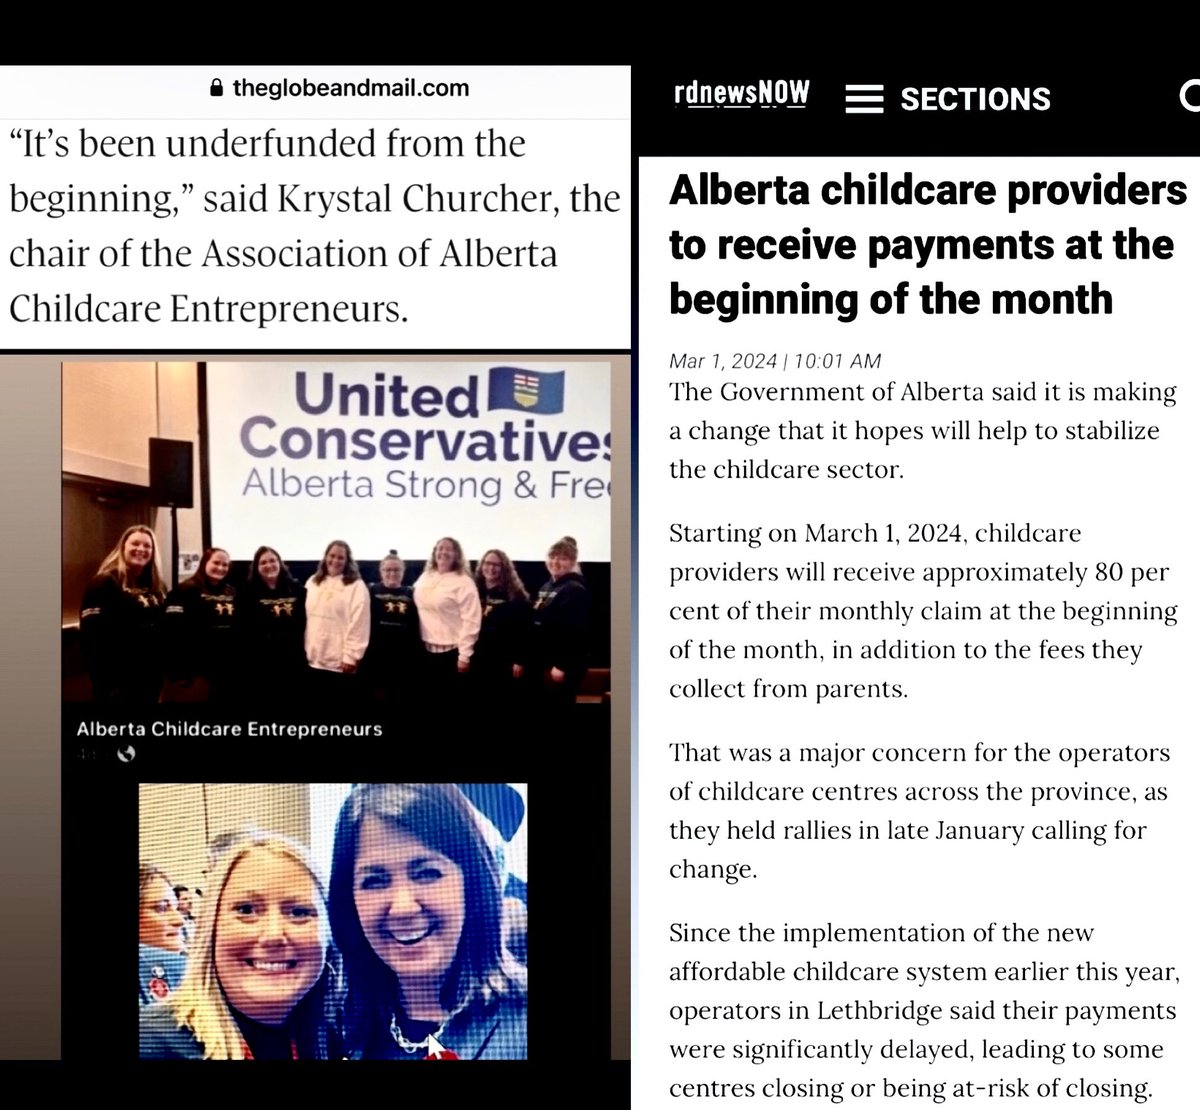 @nationalpost #ableg #yeg #yyc #cdnpoli #abchildcare #cdnchildcare 

The UCP were responsible for late payments to childcare centres in Alberta that put them in jeopardy of closing

While having their personal propaganda organizations spread misinformation